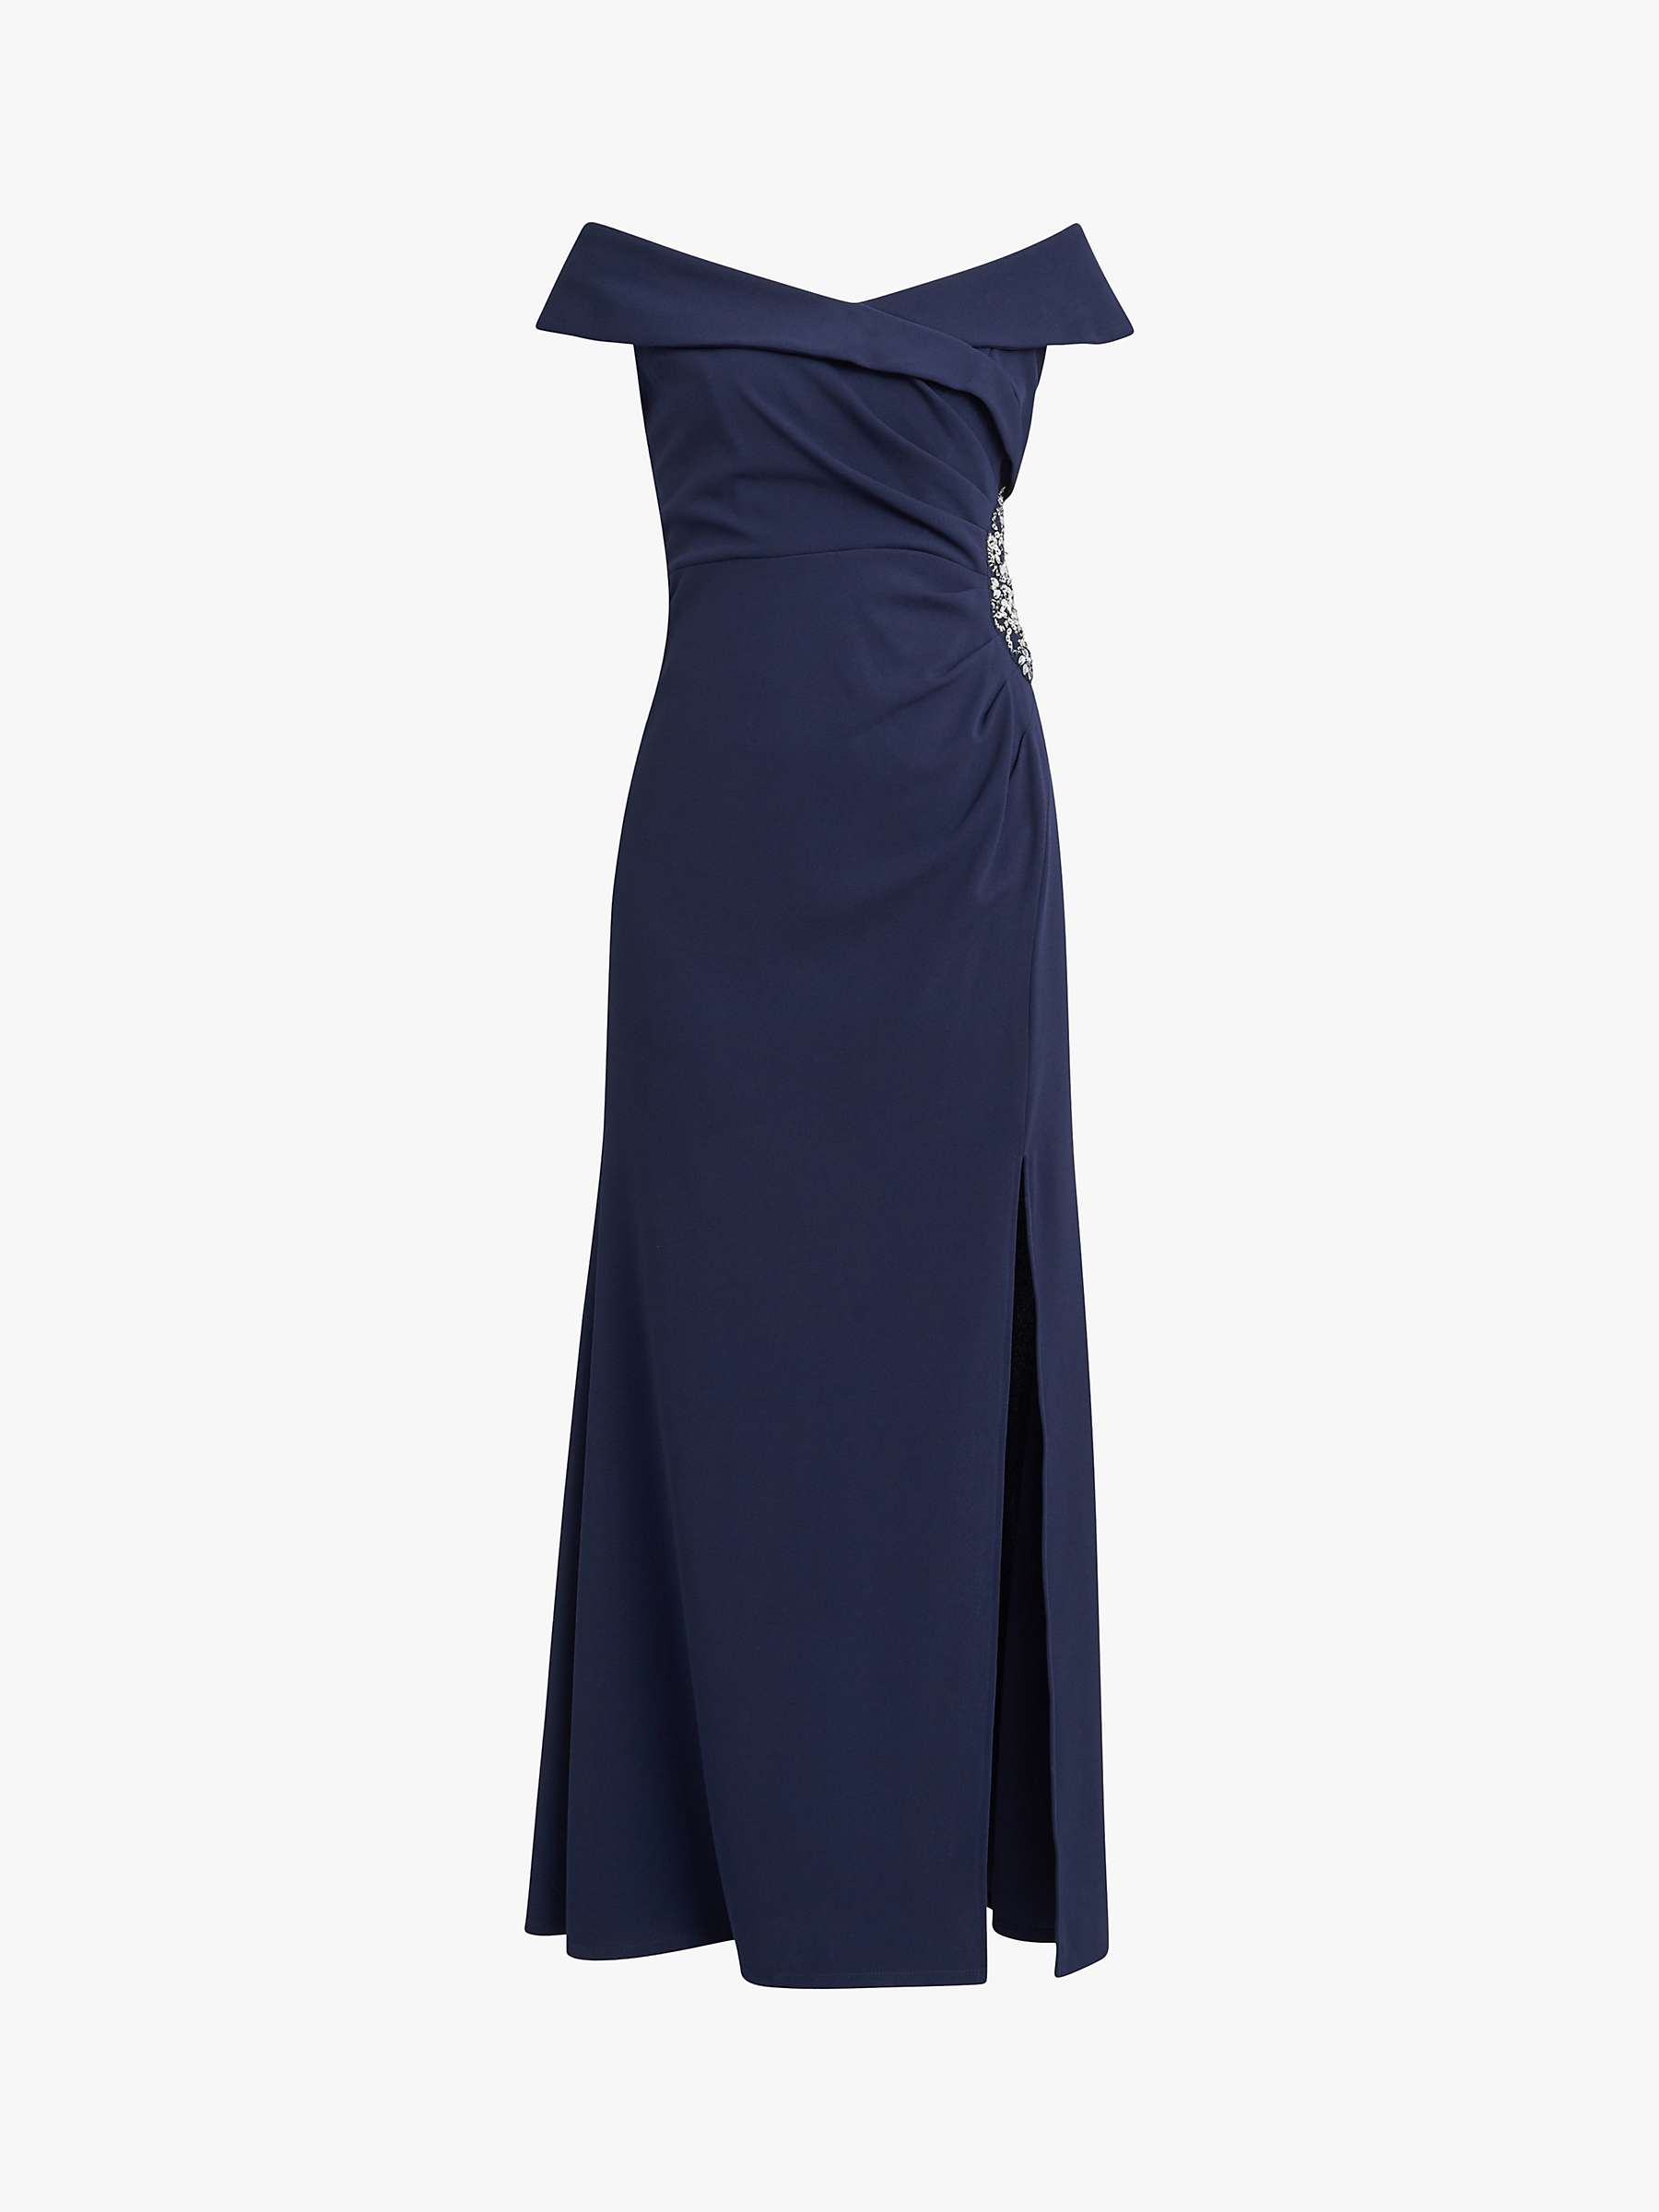 Buy Gina Bacconi Suzanne Portrait Maxi Dress, Navy Online at johnlewis.com